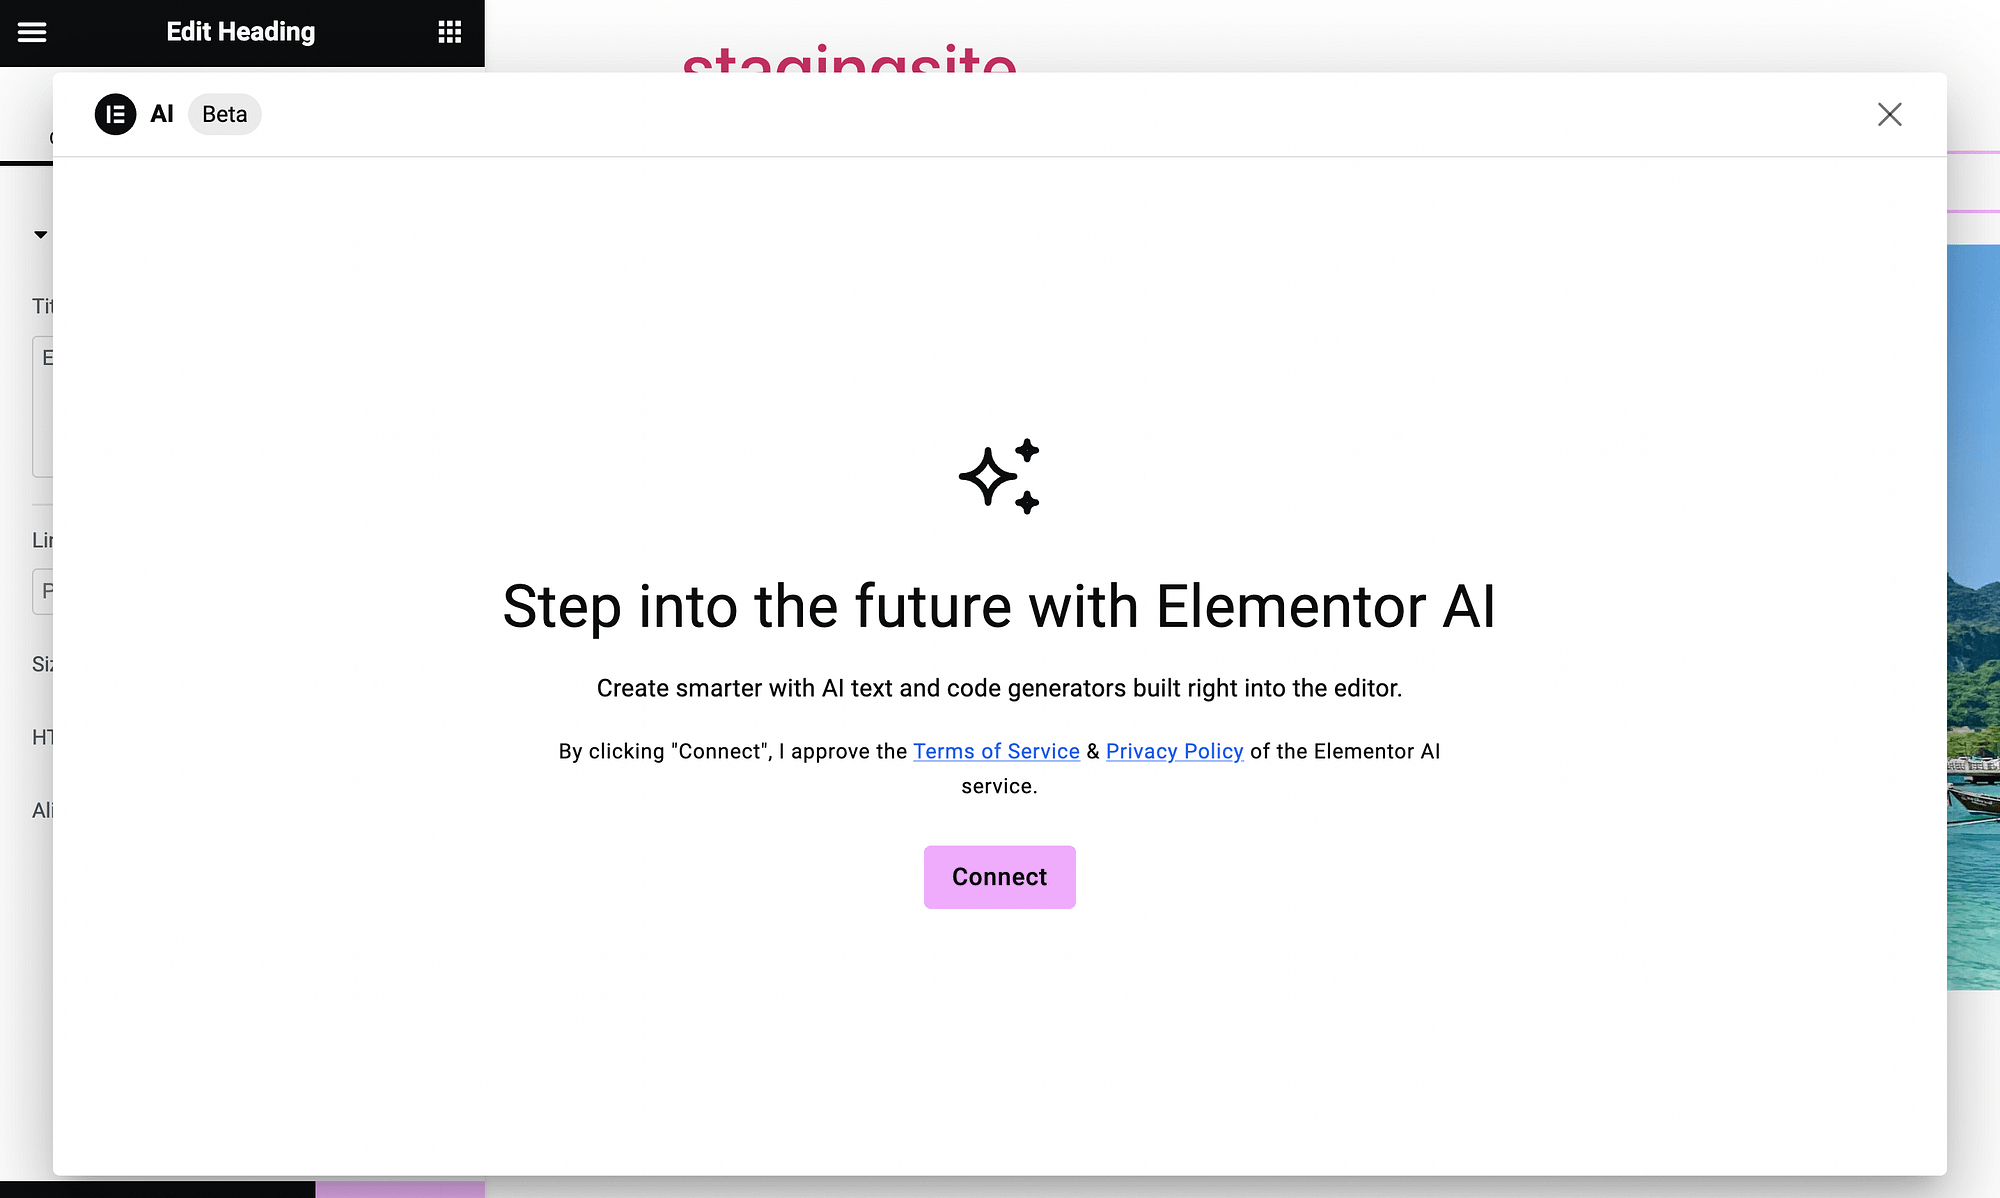 Connect to Elementor AI.